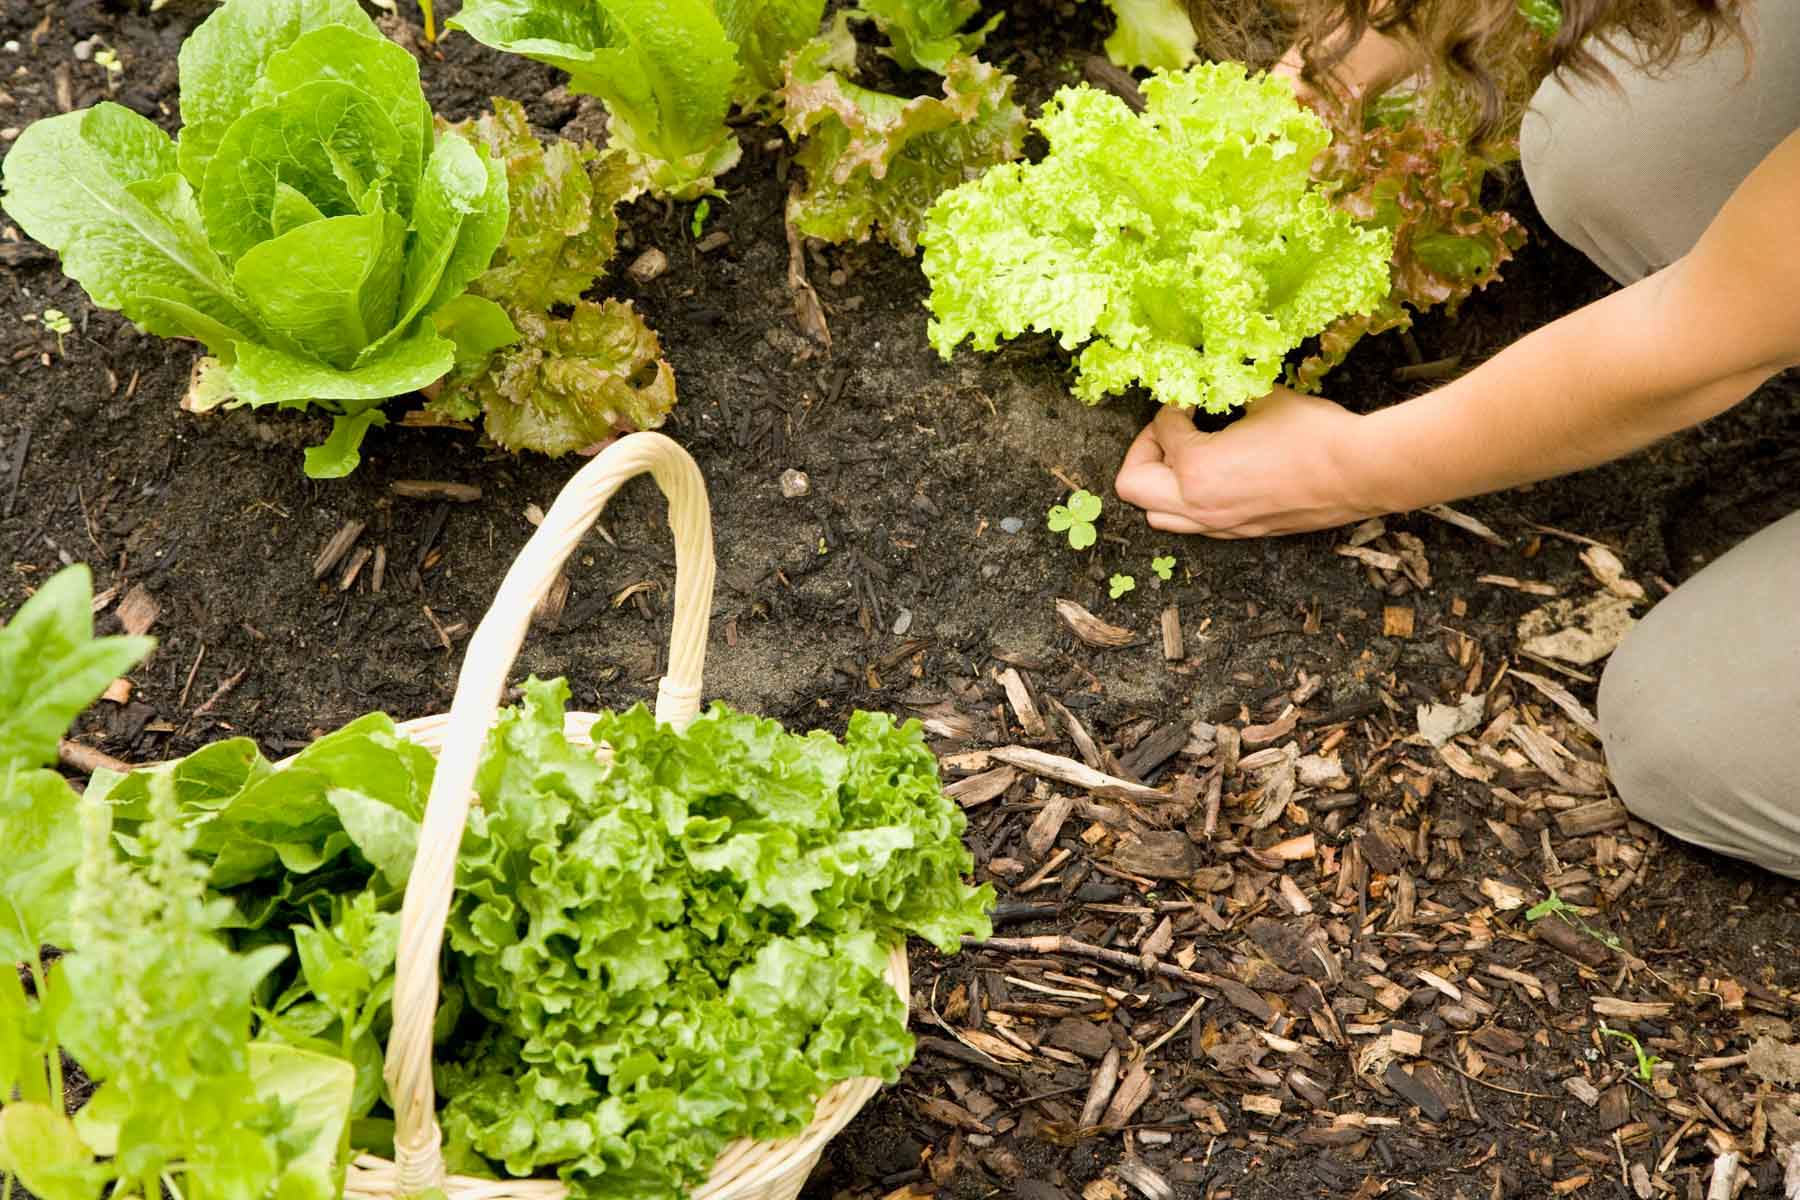 The Perfect Time To Harvest Lettuce From Your Garden!